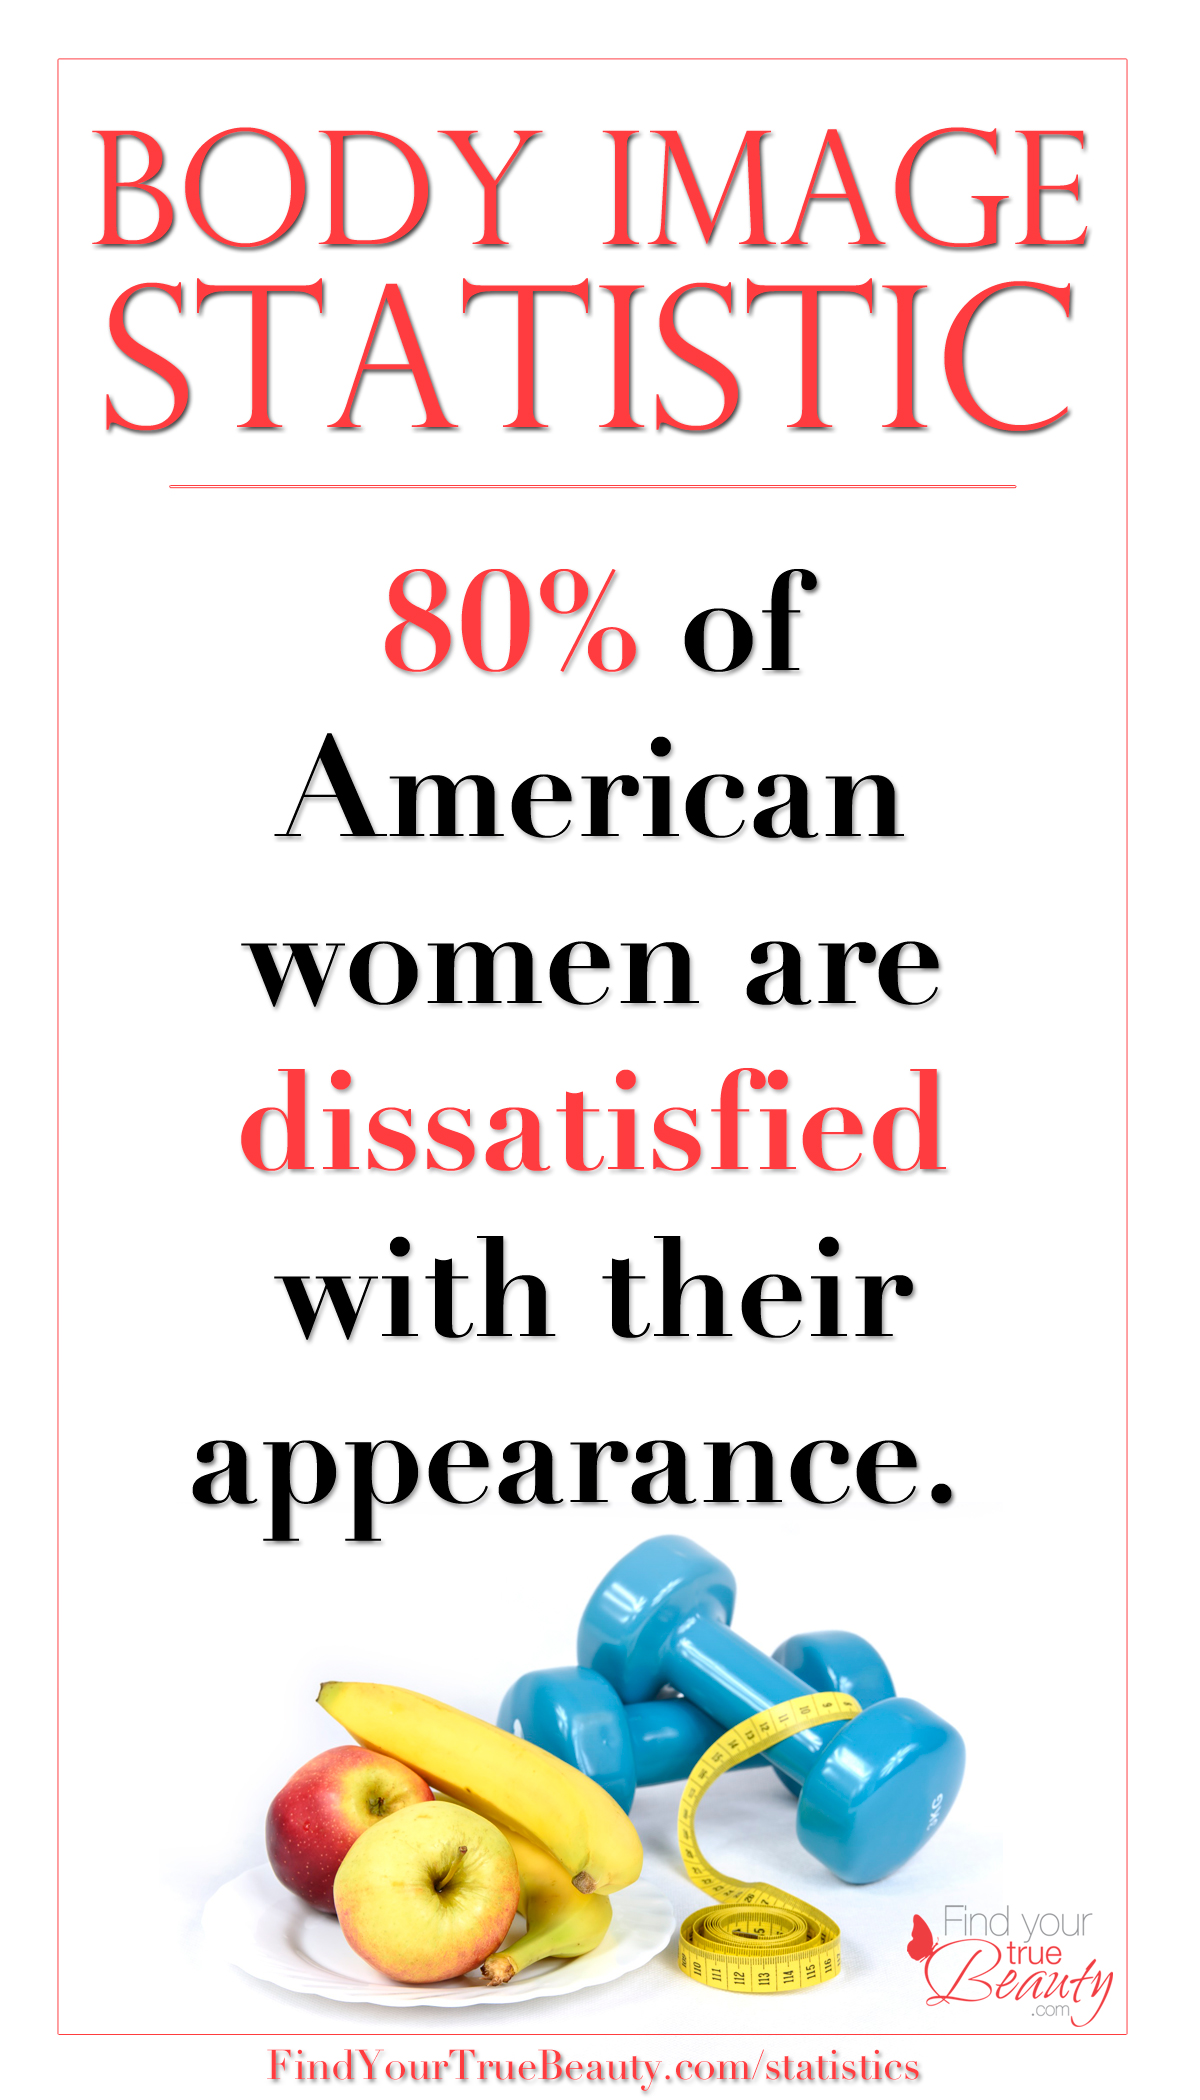 Body Image Statistic: 80% of American women are dissatisfied with their appearance #bodyimage